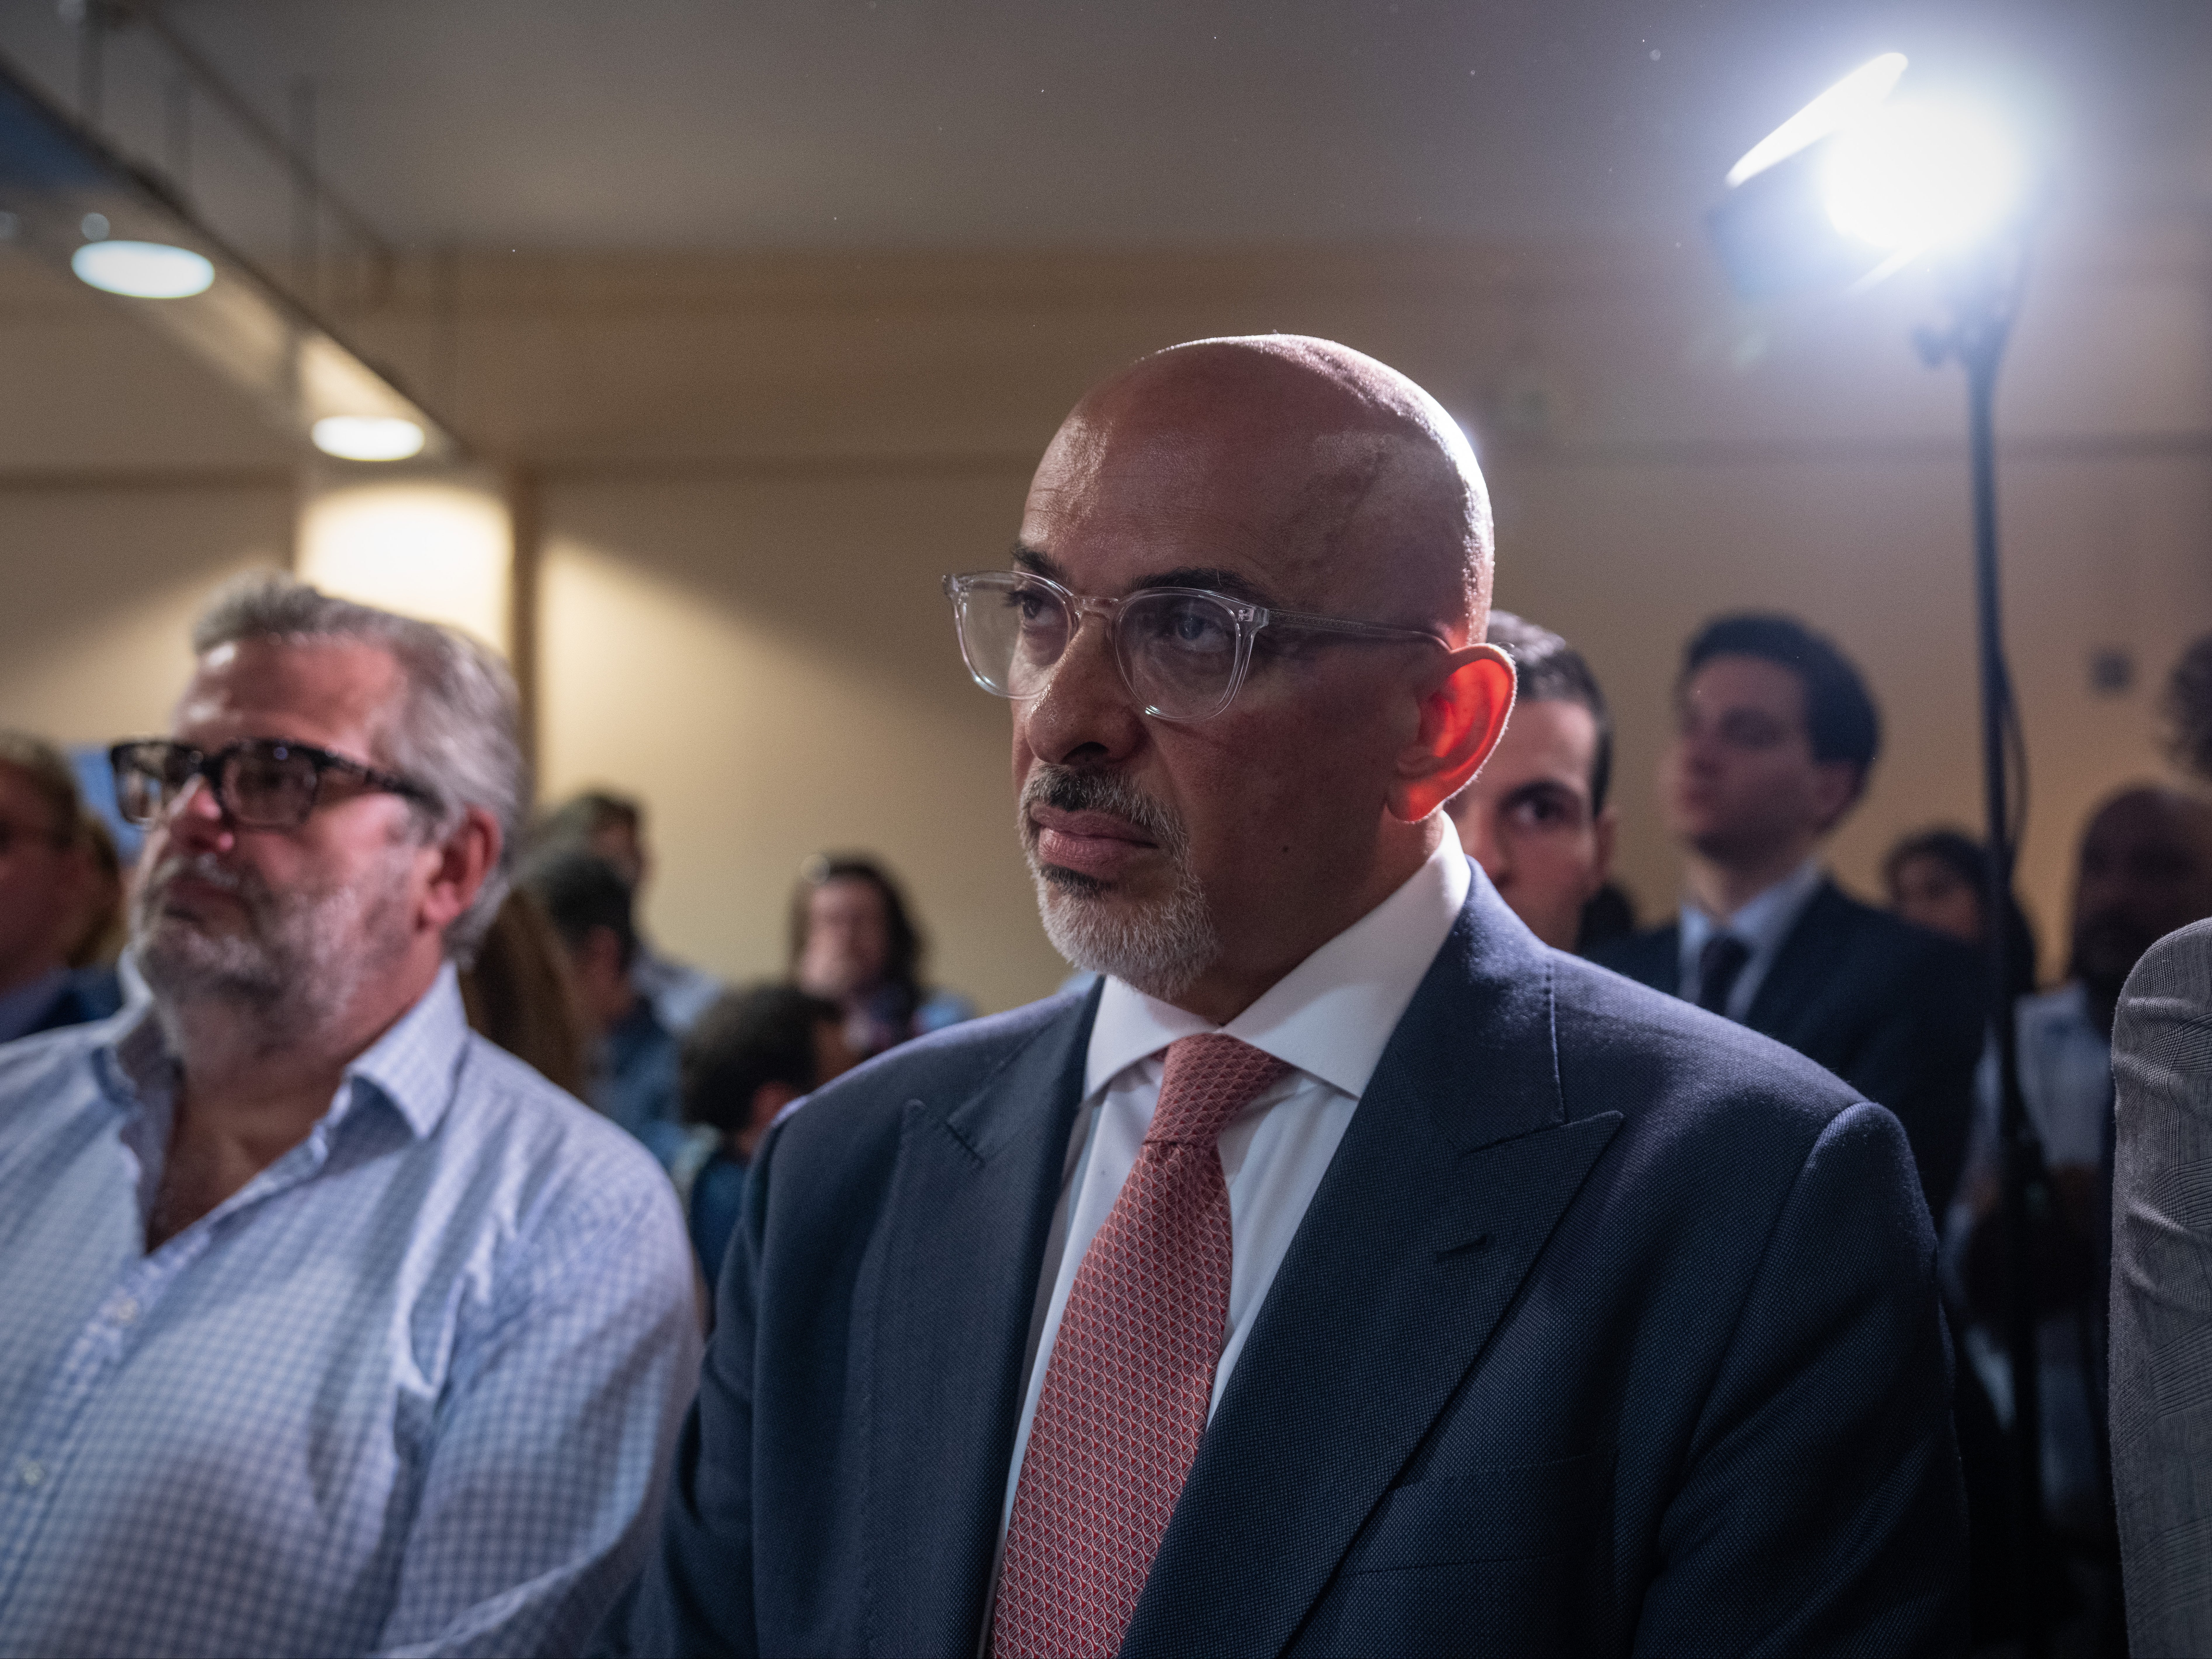 Nadhim Zahawi insists he is “clearly being smeared” and he has “always paid my taxes”